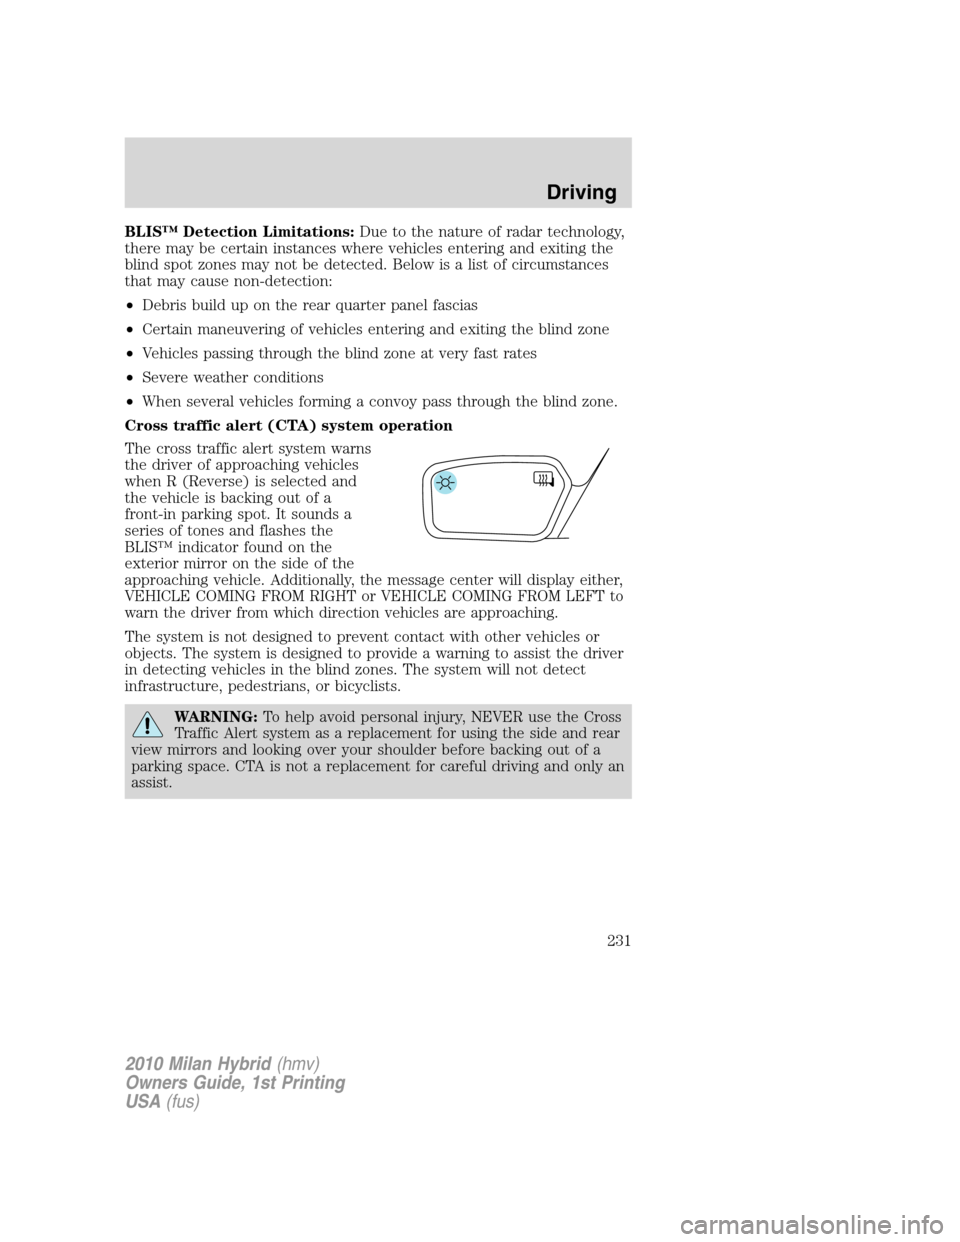 Mercury Milan Hybrid 2010  Owners Manuals BLIS™ Detection Limitations:Due to the nature of radar technology,
there may be certain instances where vehicles entering and exiting the
blind spot zones may not be detected. Below is a list of cir